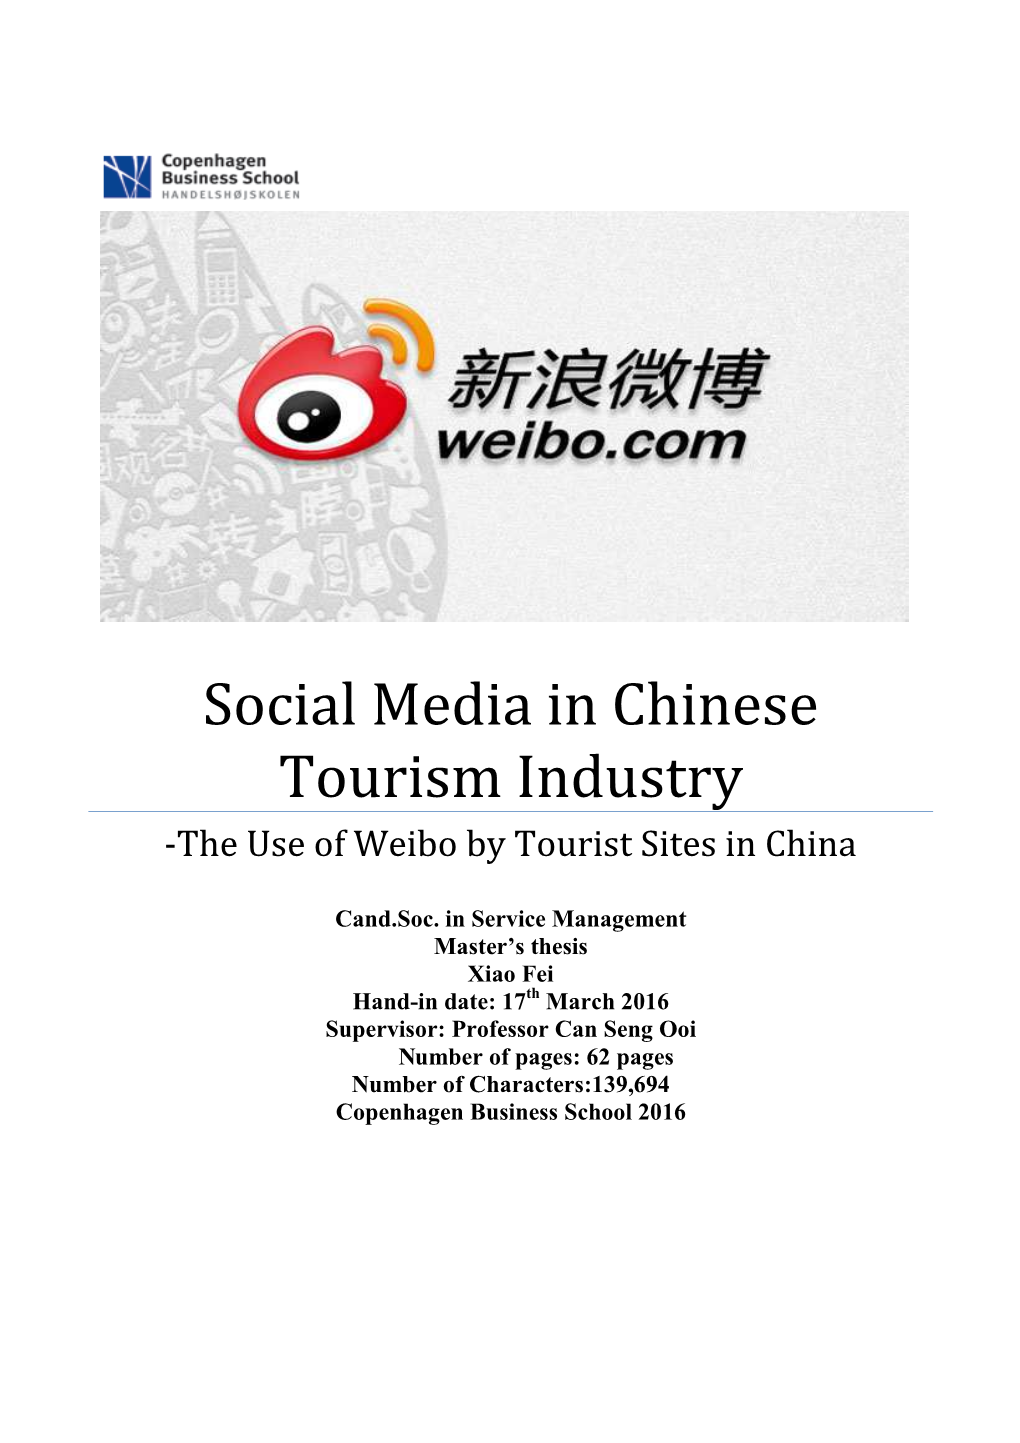 Social Media in Chinese Tourism Industry -The Use of Weibo by Tourist Sites in China